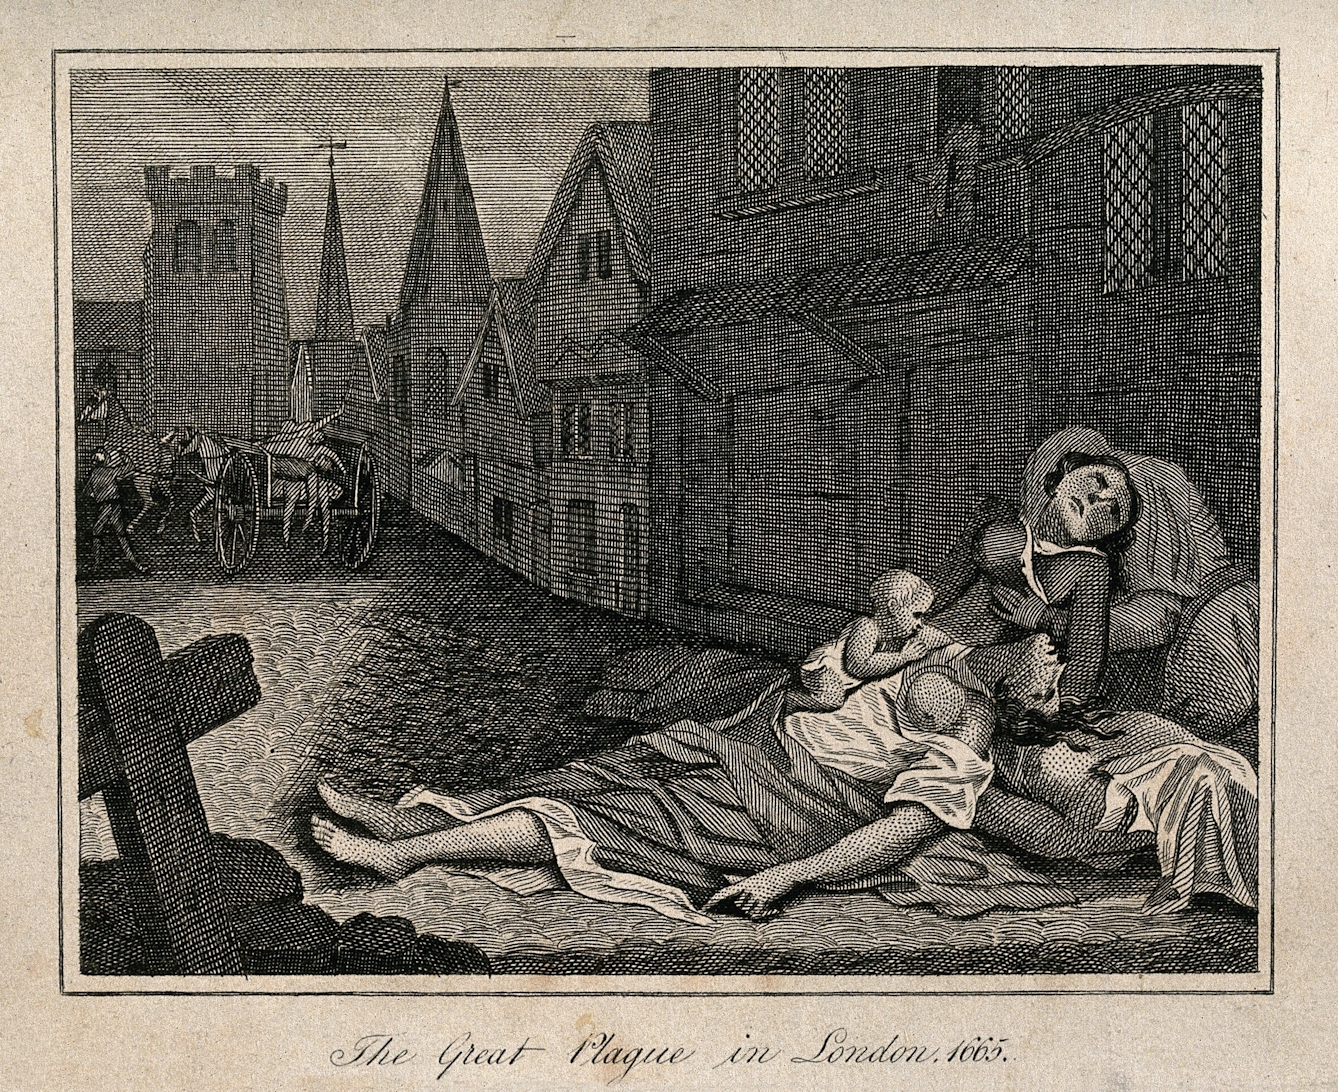 Black and white etching showing a London street with several bodies laying dead in the foreground. A baby appears to be trying to feed from the breast of one corpse. In the background, a cart is taking away more bodies towards a church tower.